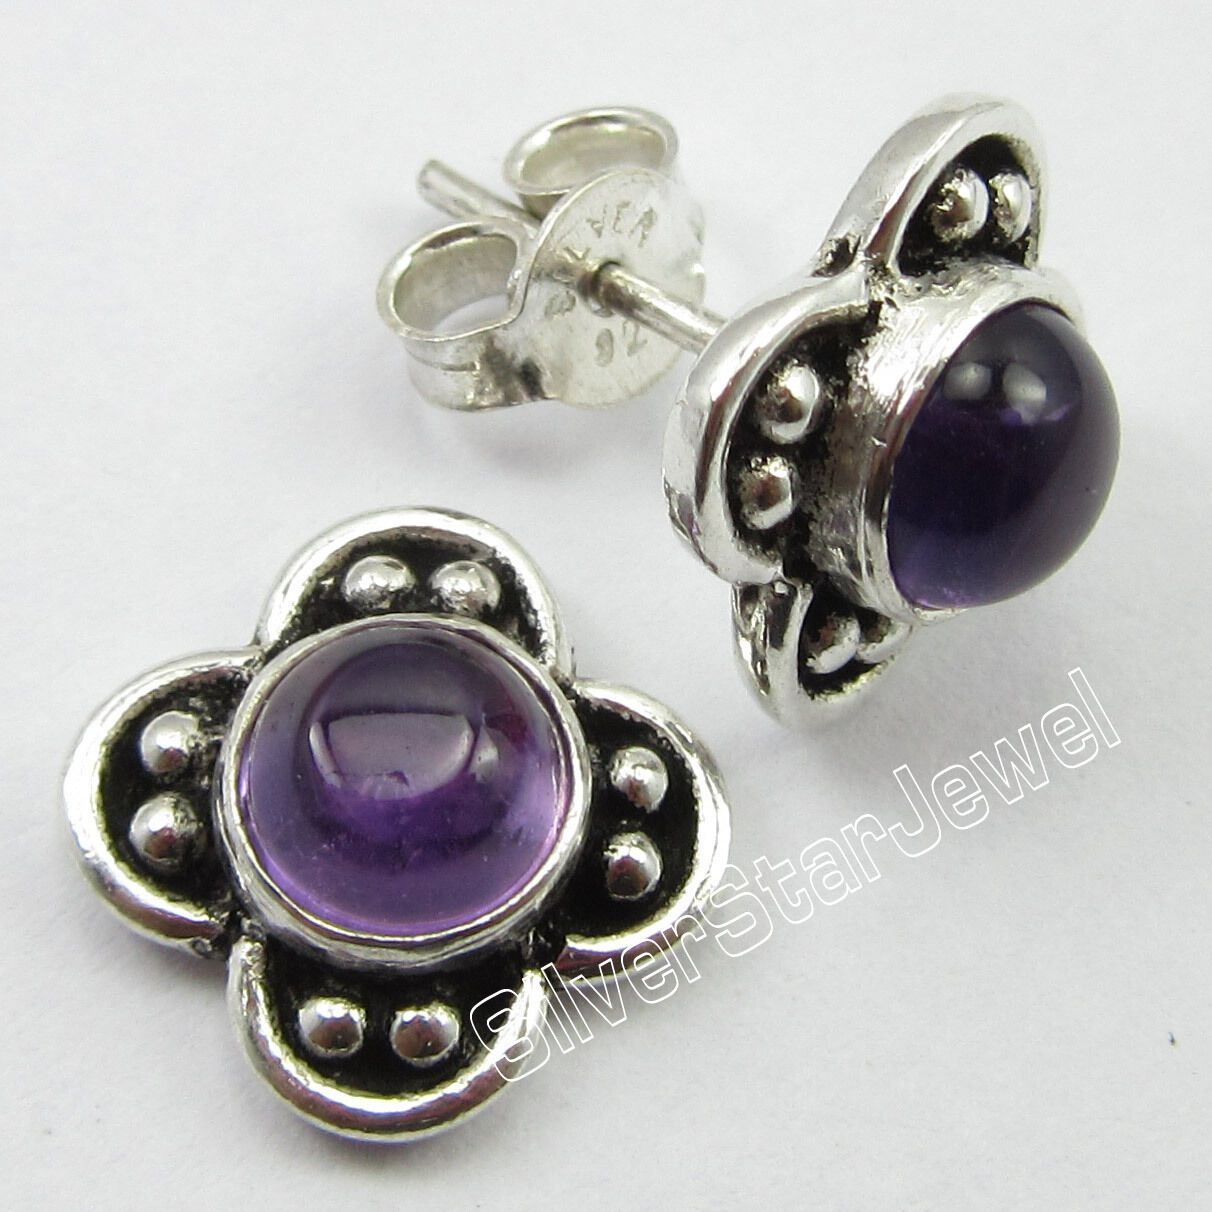 925 Sterling Silver CABOCHON AMETHYST OLD STYLE Stud-Post Earrings 1.0 CM NEW